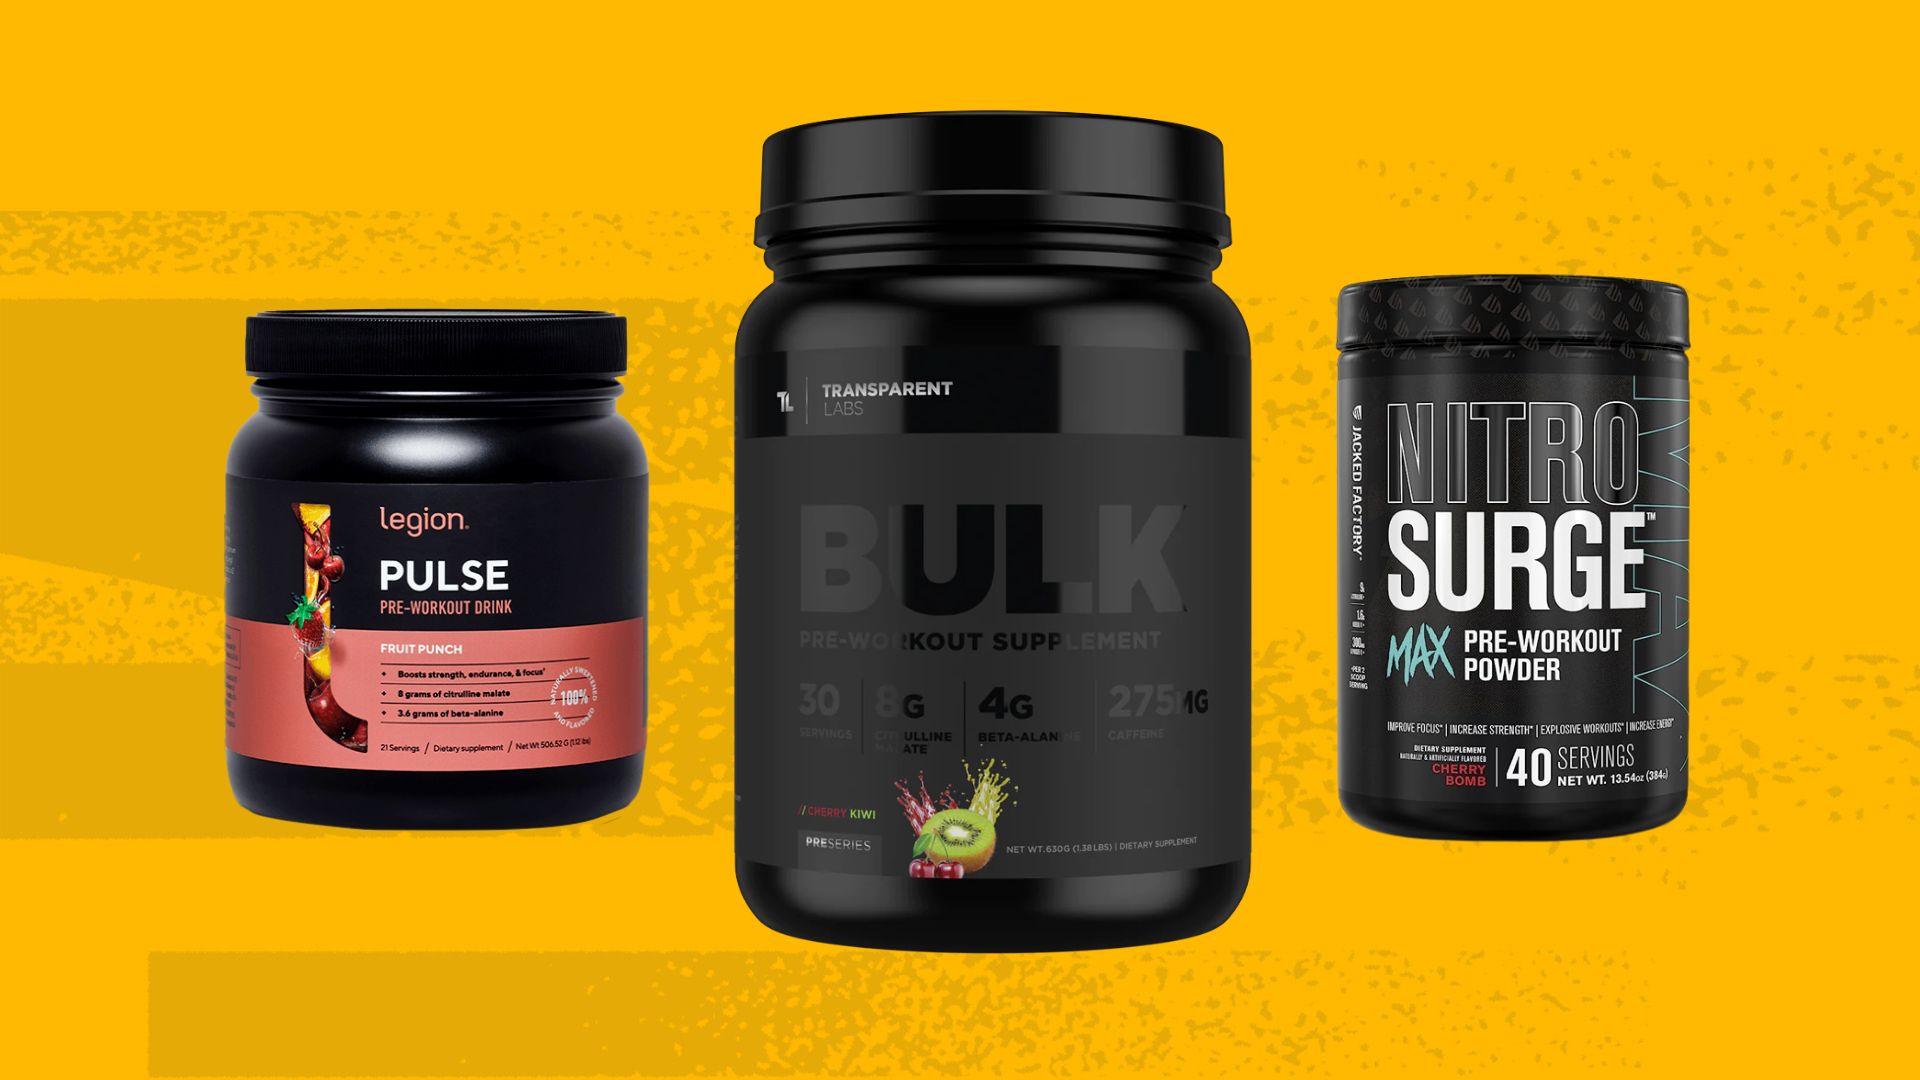 What Are Pre-Workout Supplements Used For?